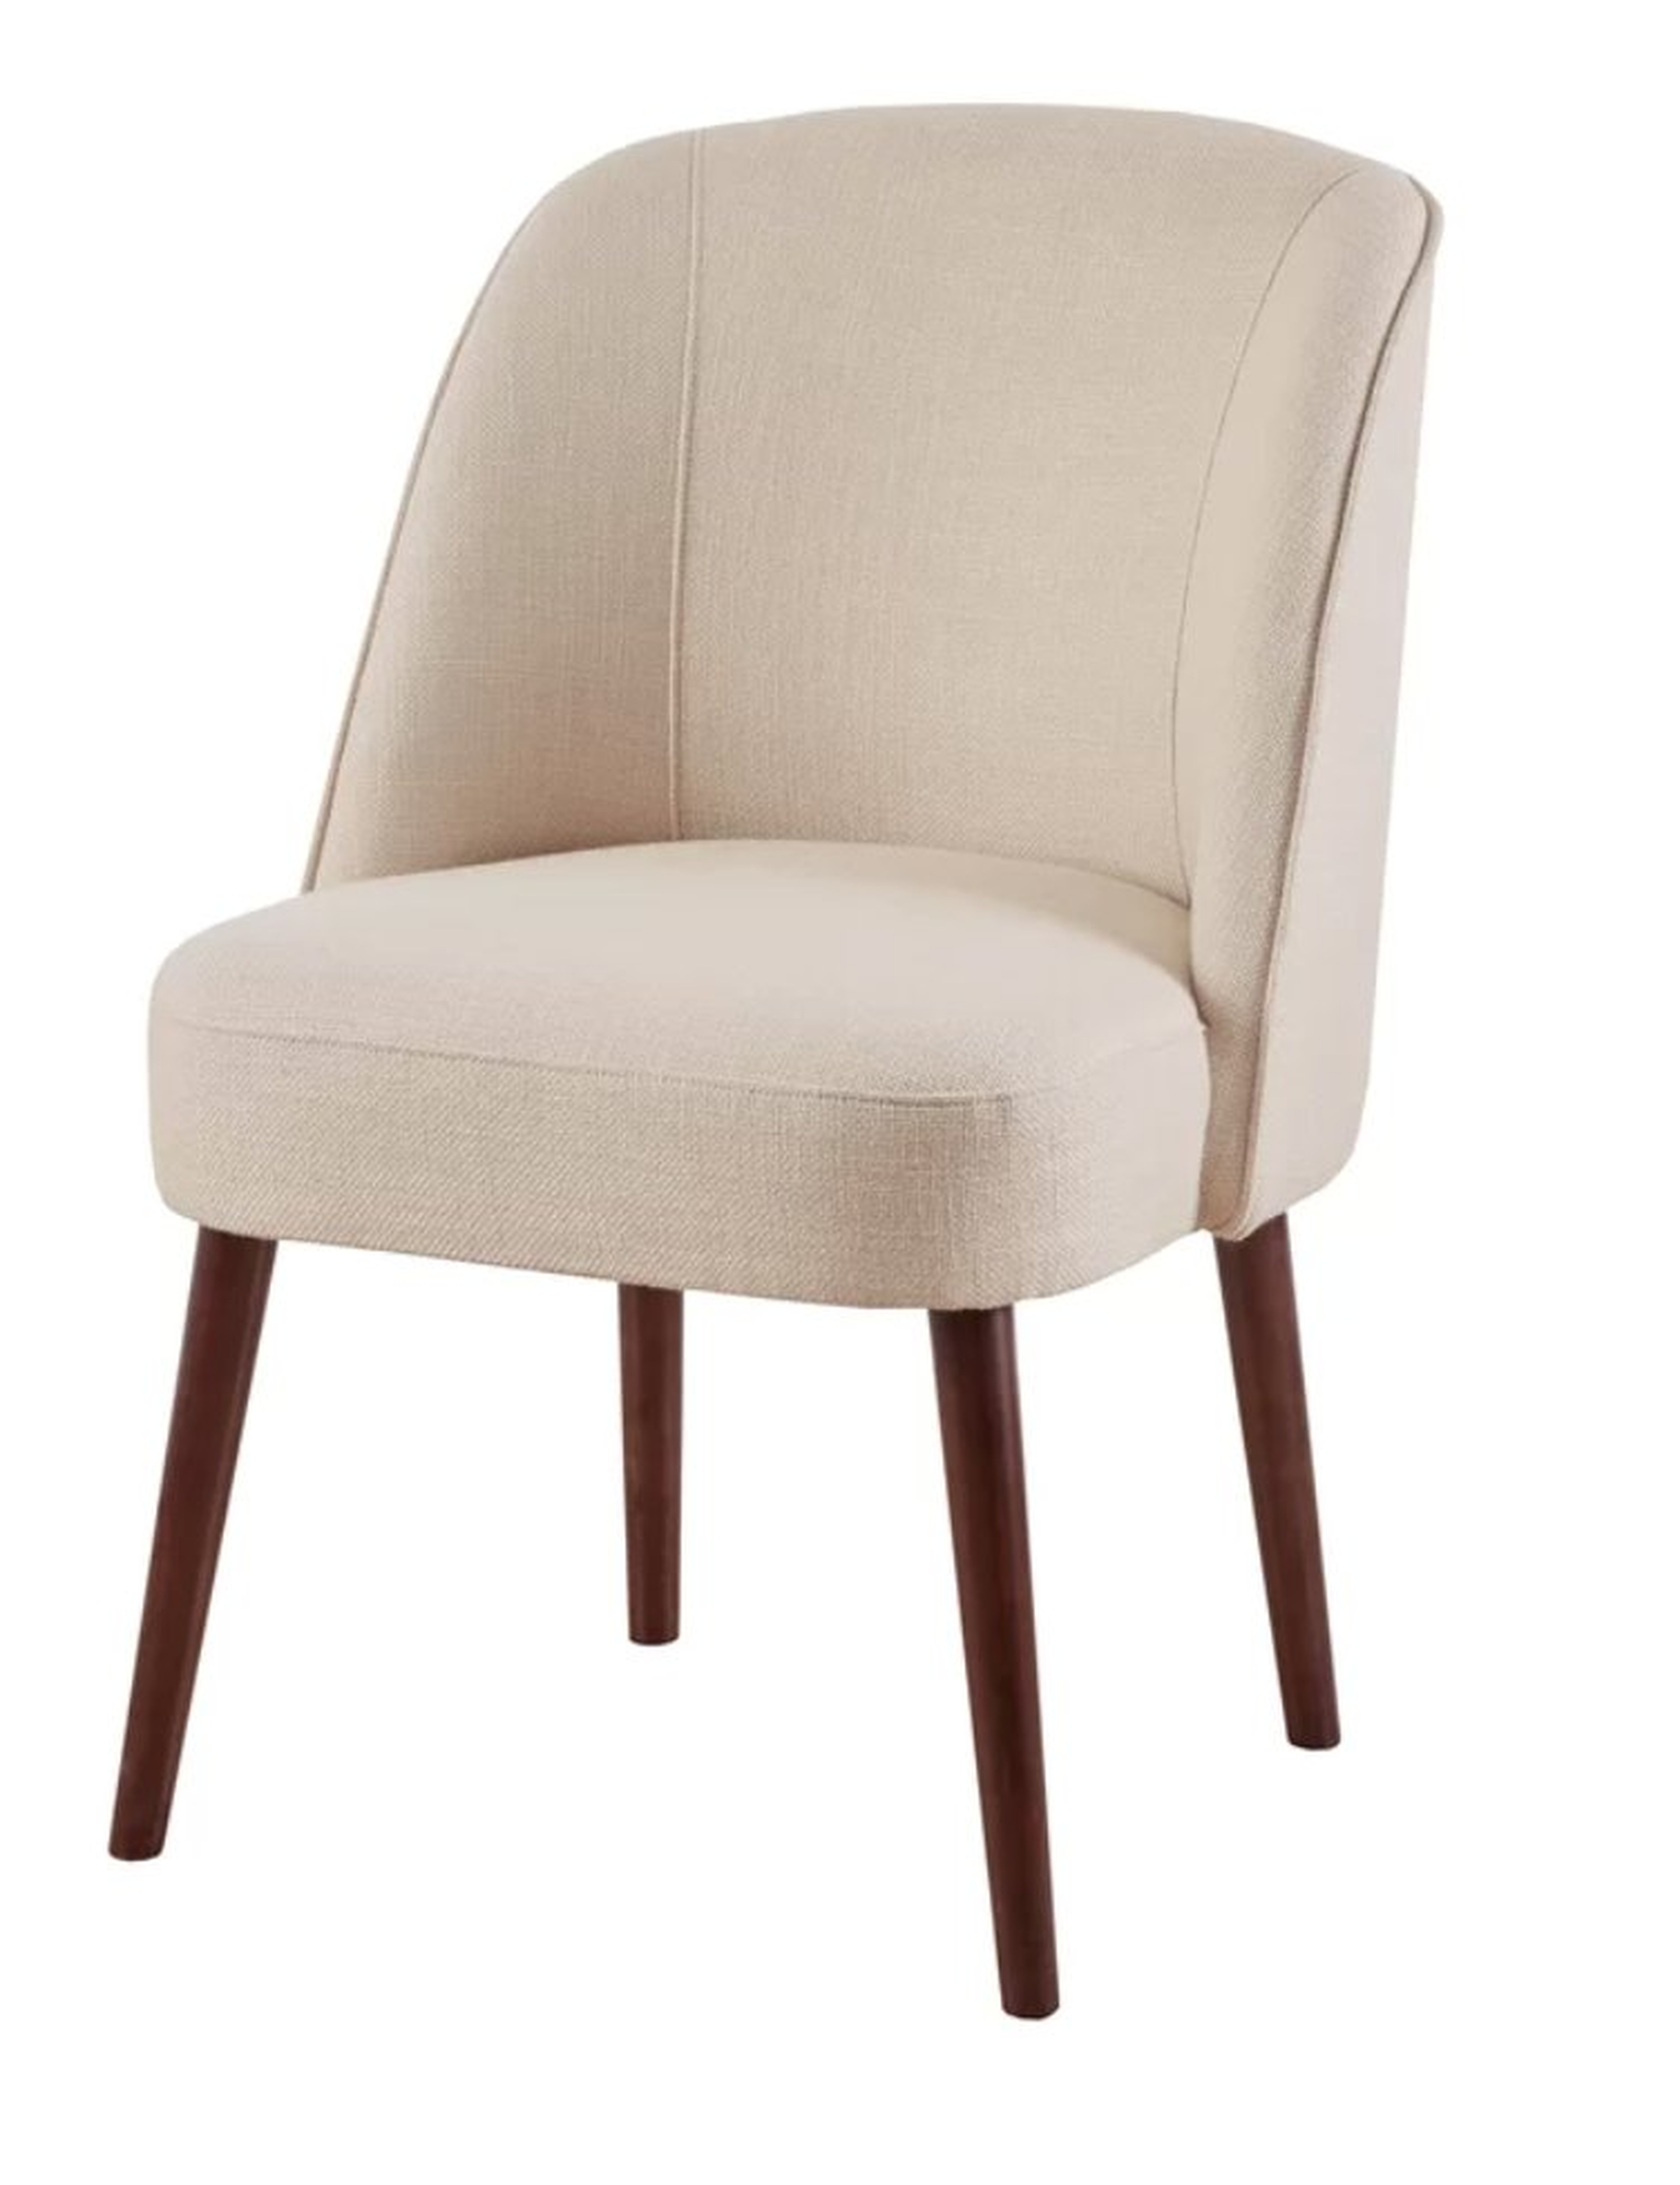 Sutliff Rounded Back Dining Chair - Wayfair